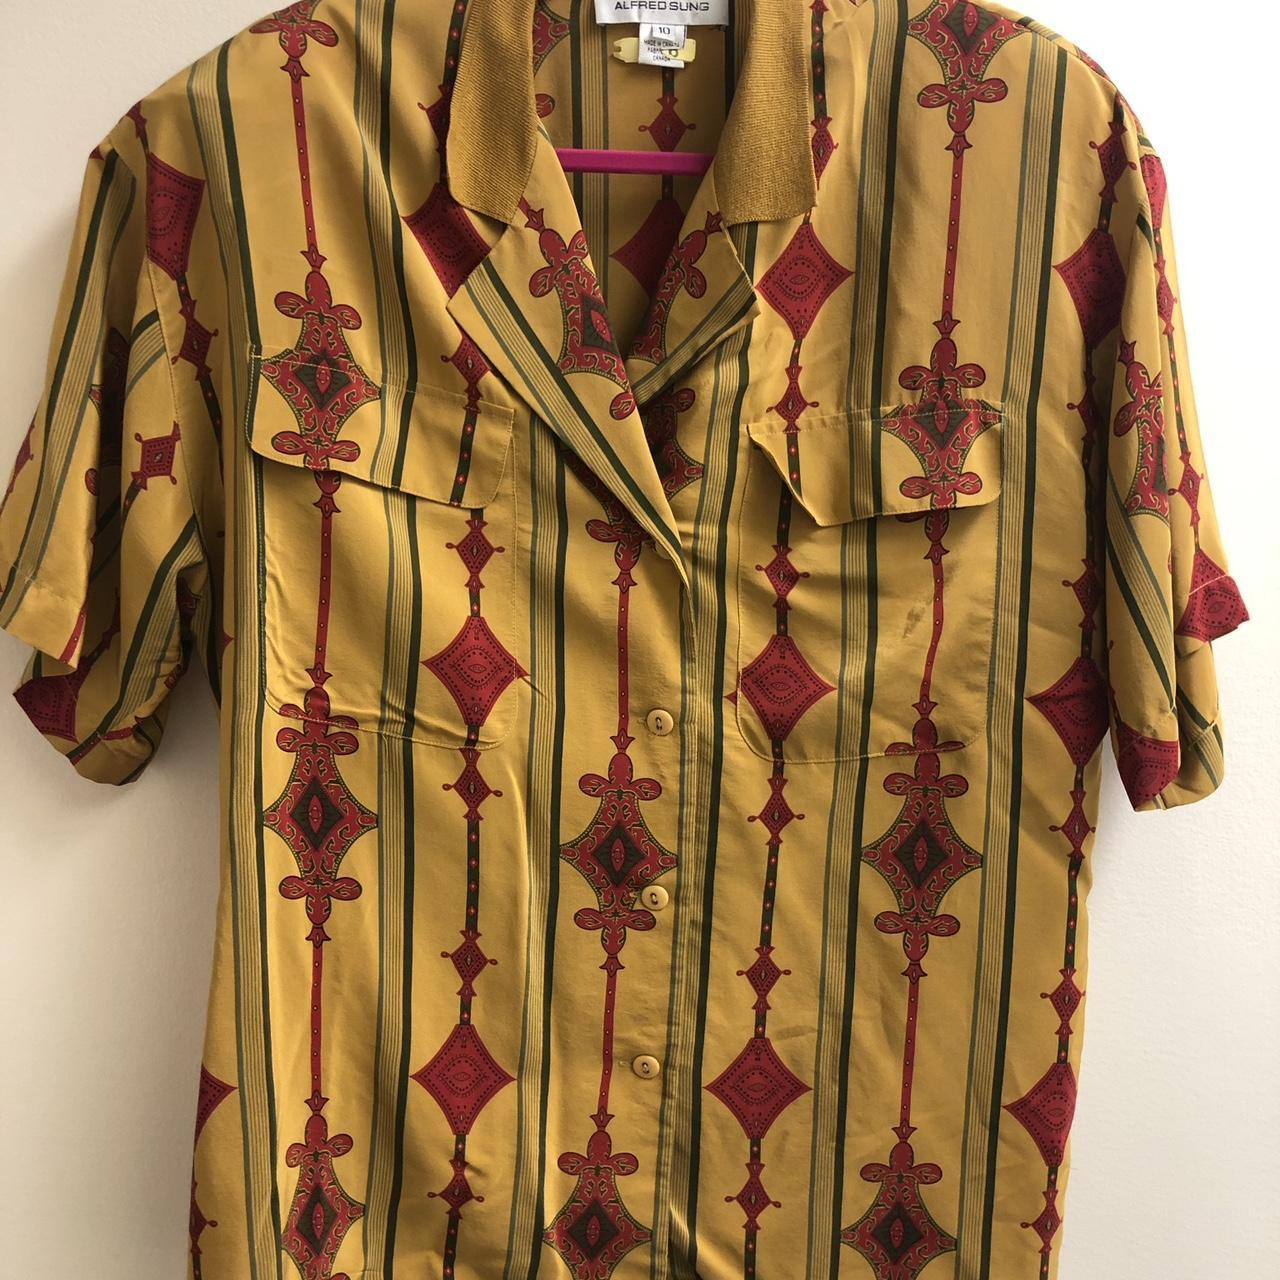 Alfred Sung Women's Blouse